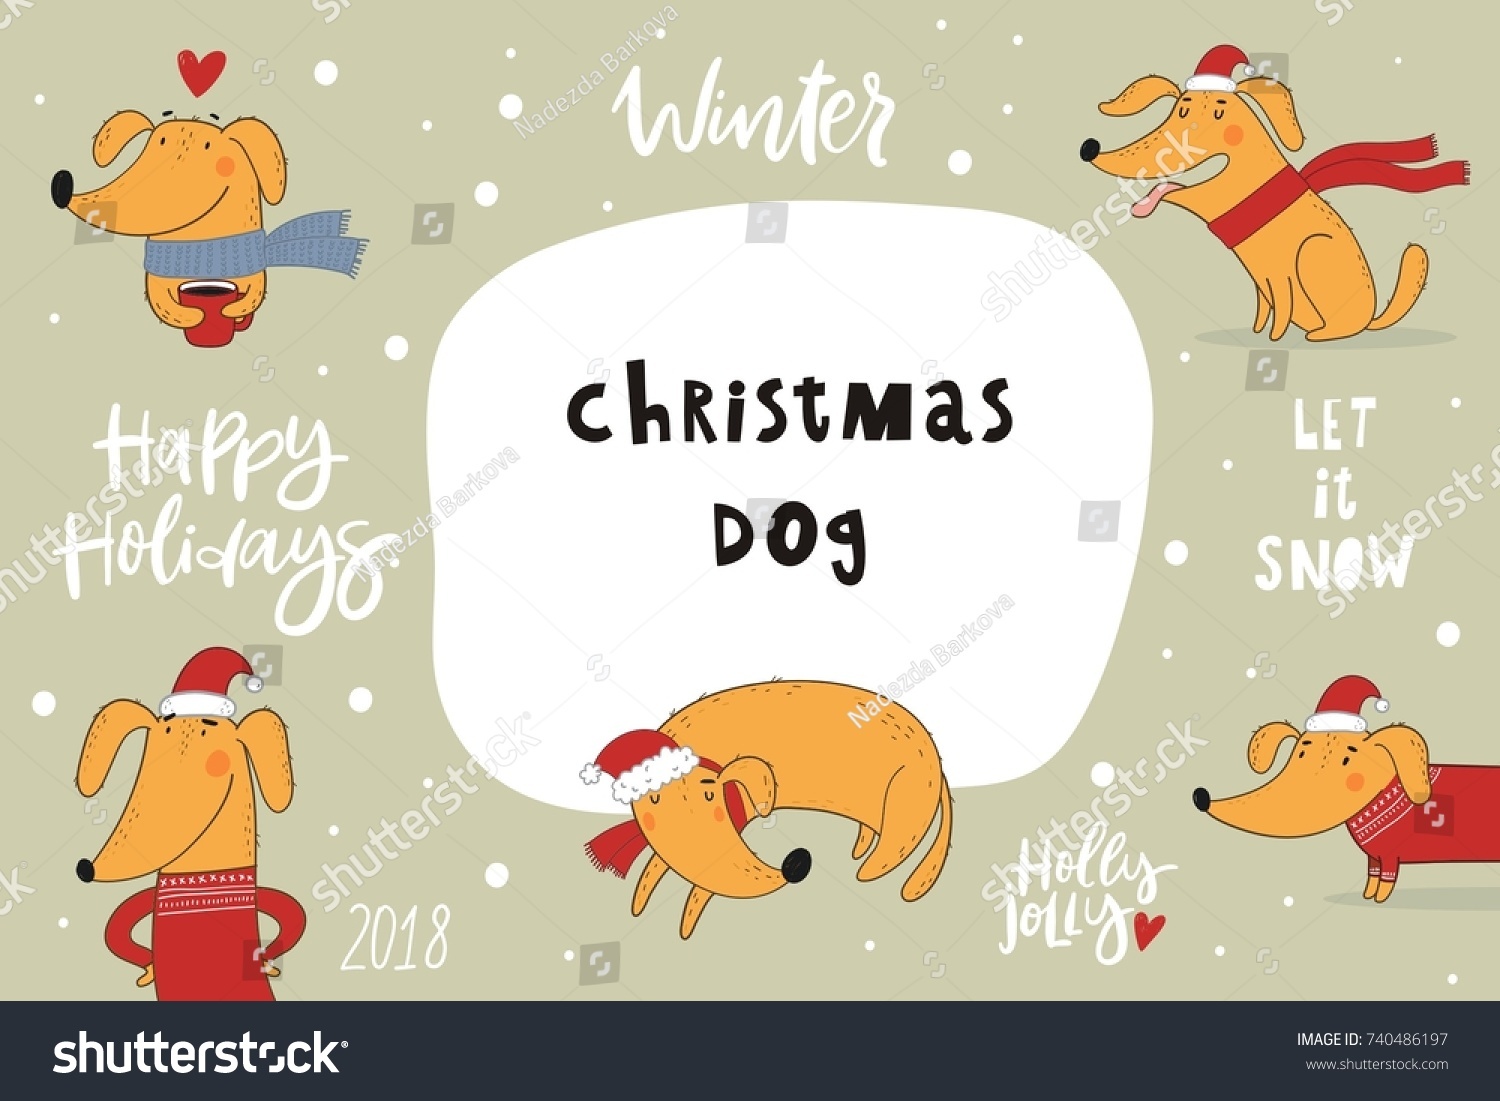 Merry Christmas and Happy New Year card with cute dog